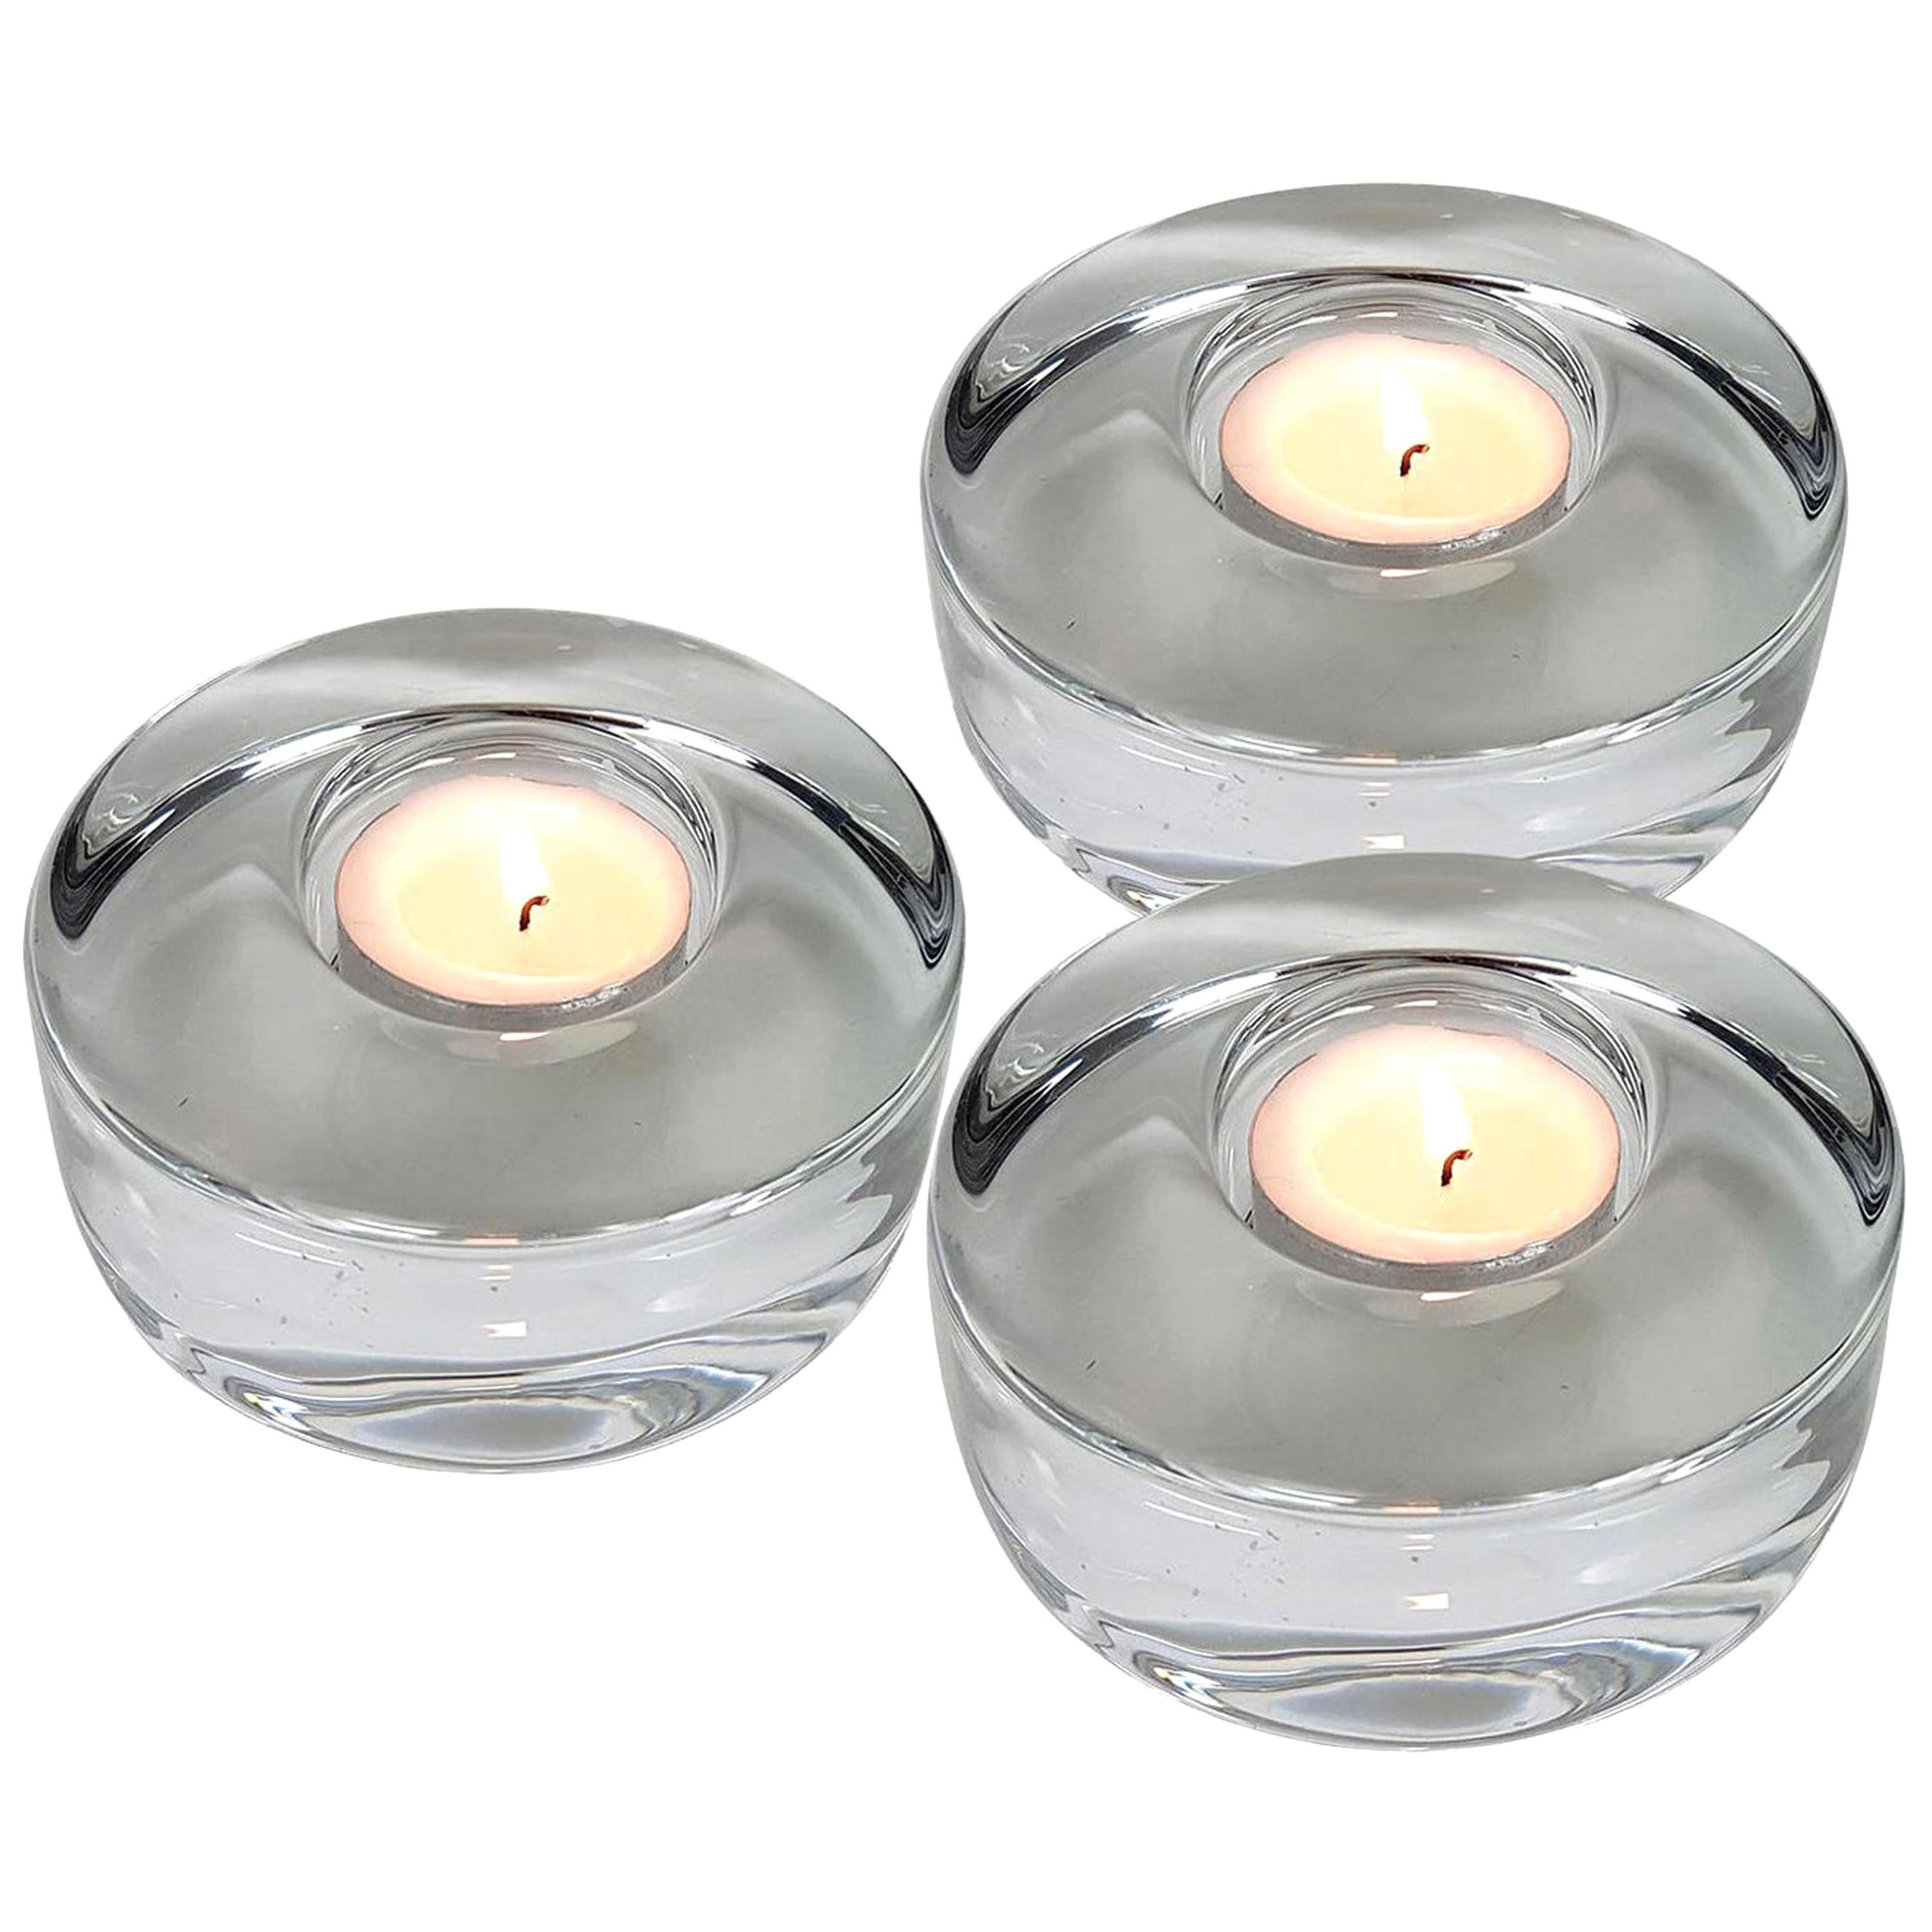 Set of Three Crystal Glass Votive Candleholders by Kosta Boda for Orrefors